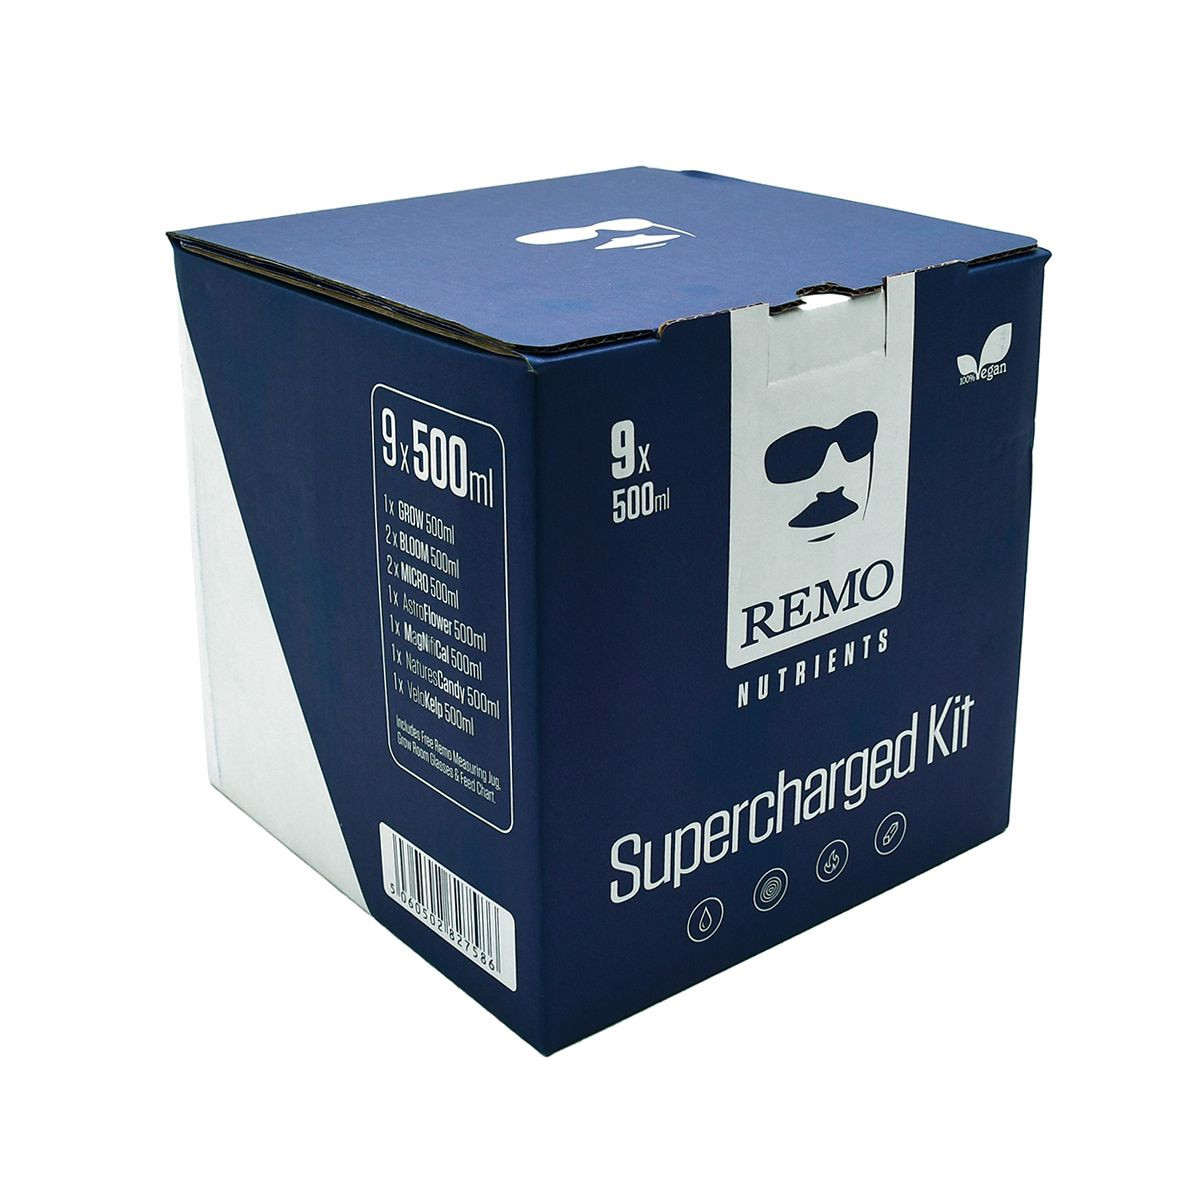 REMO SUPERCHARGED 500ML STARTER KIT